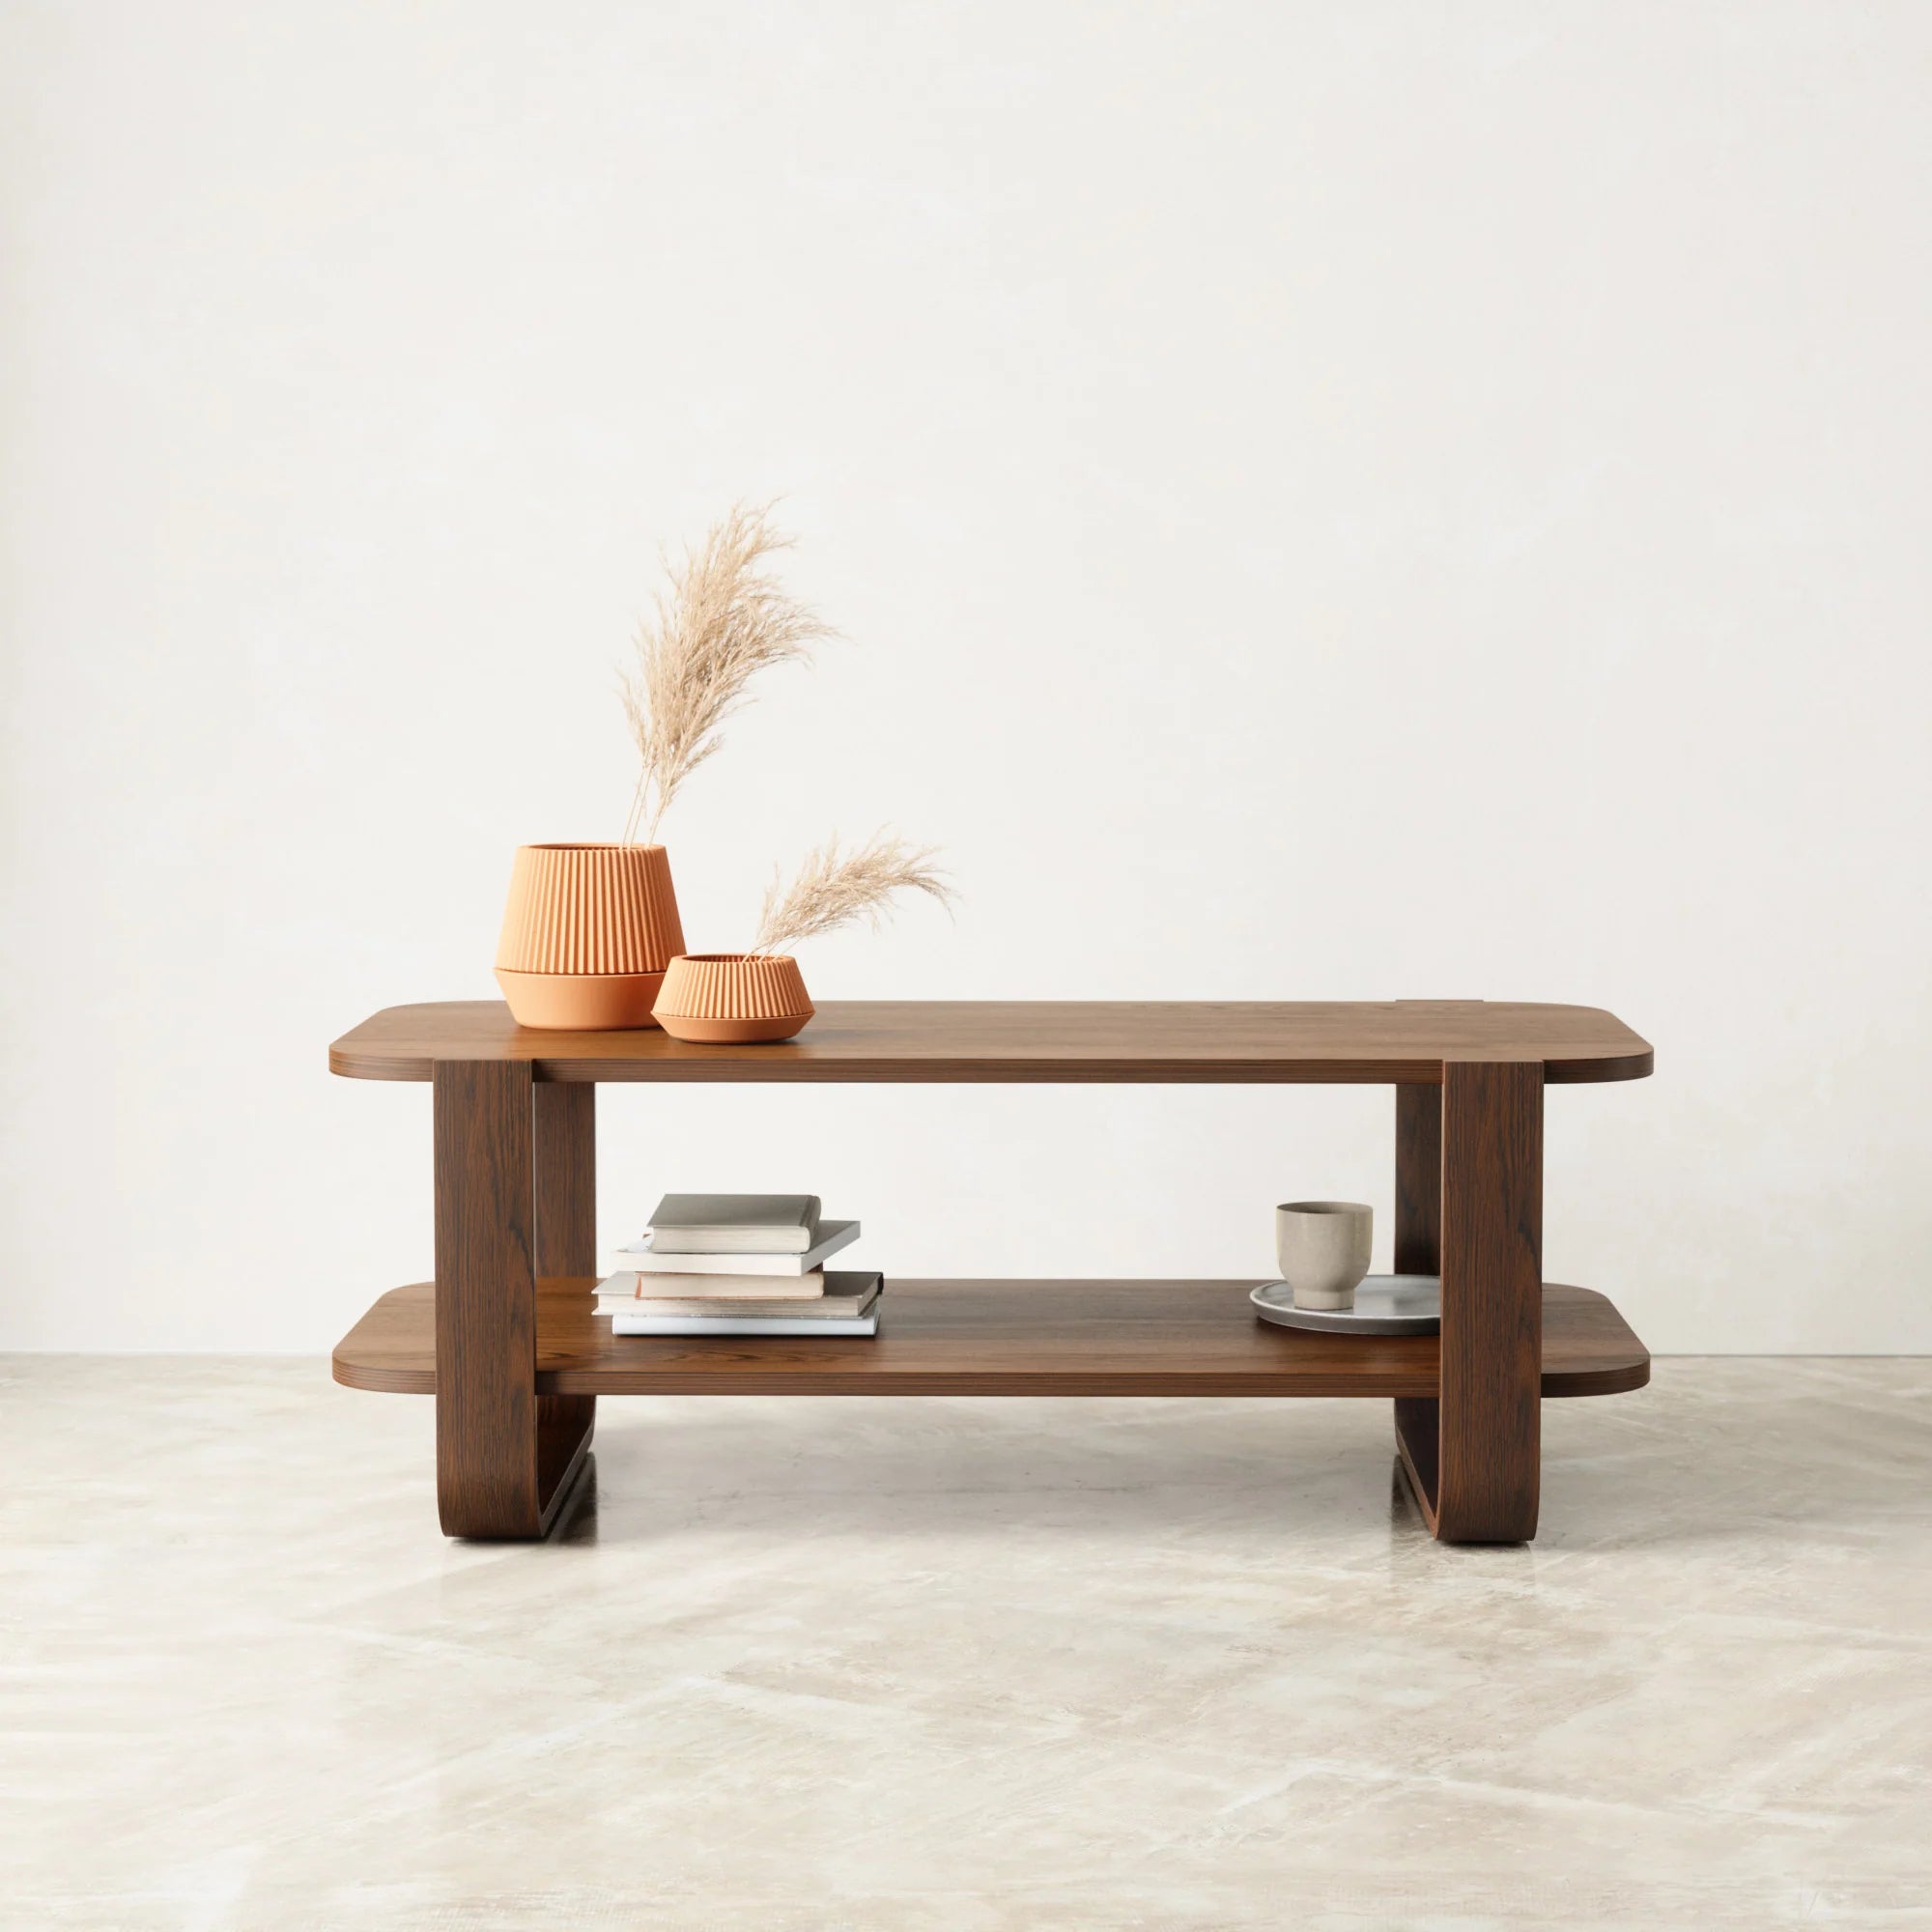 Bellwood Coffee Table - Natural